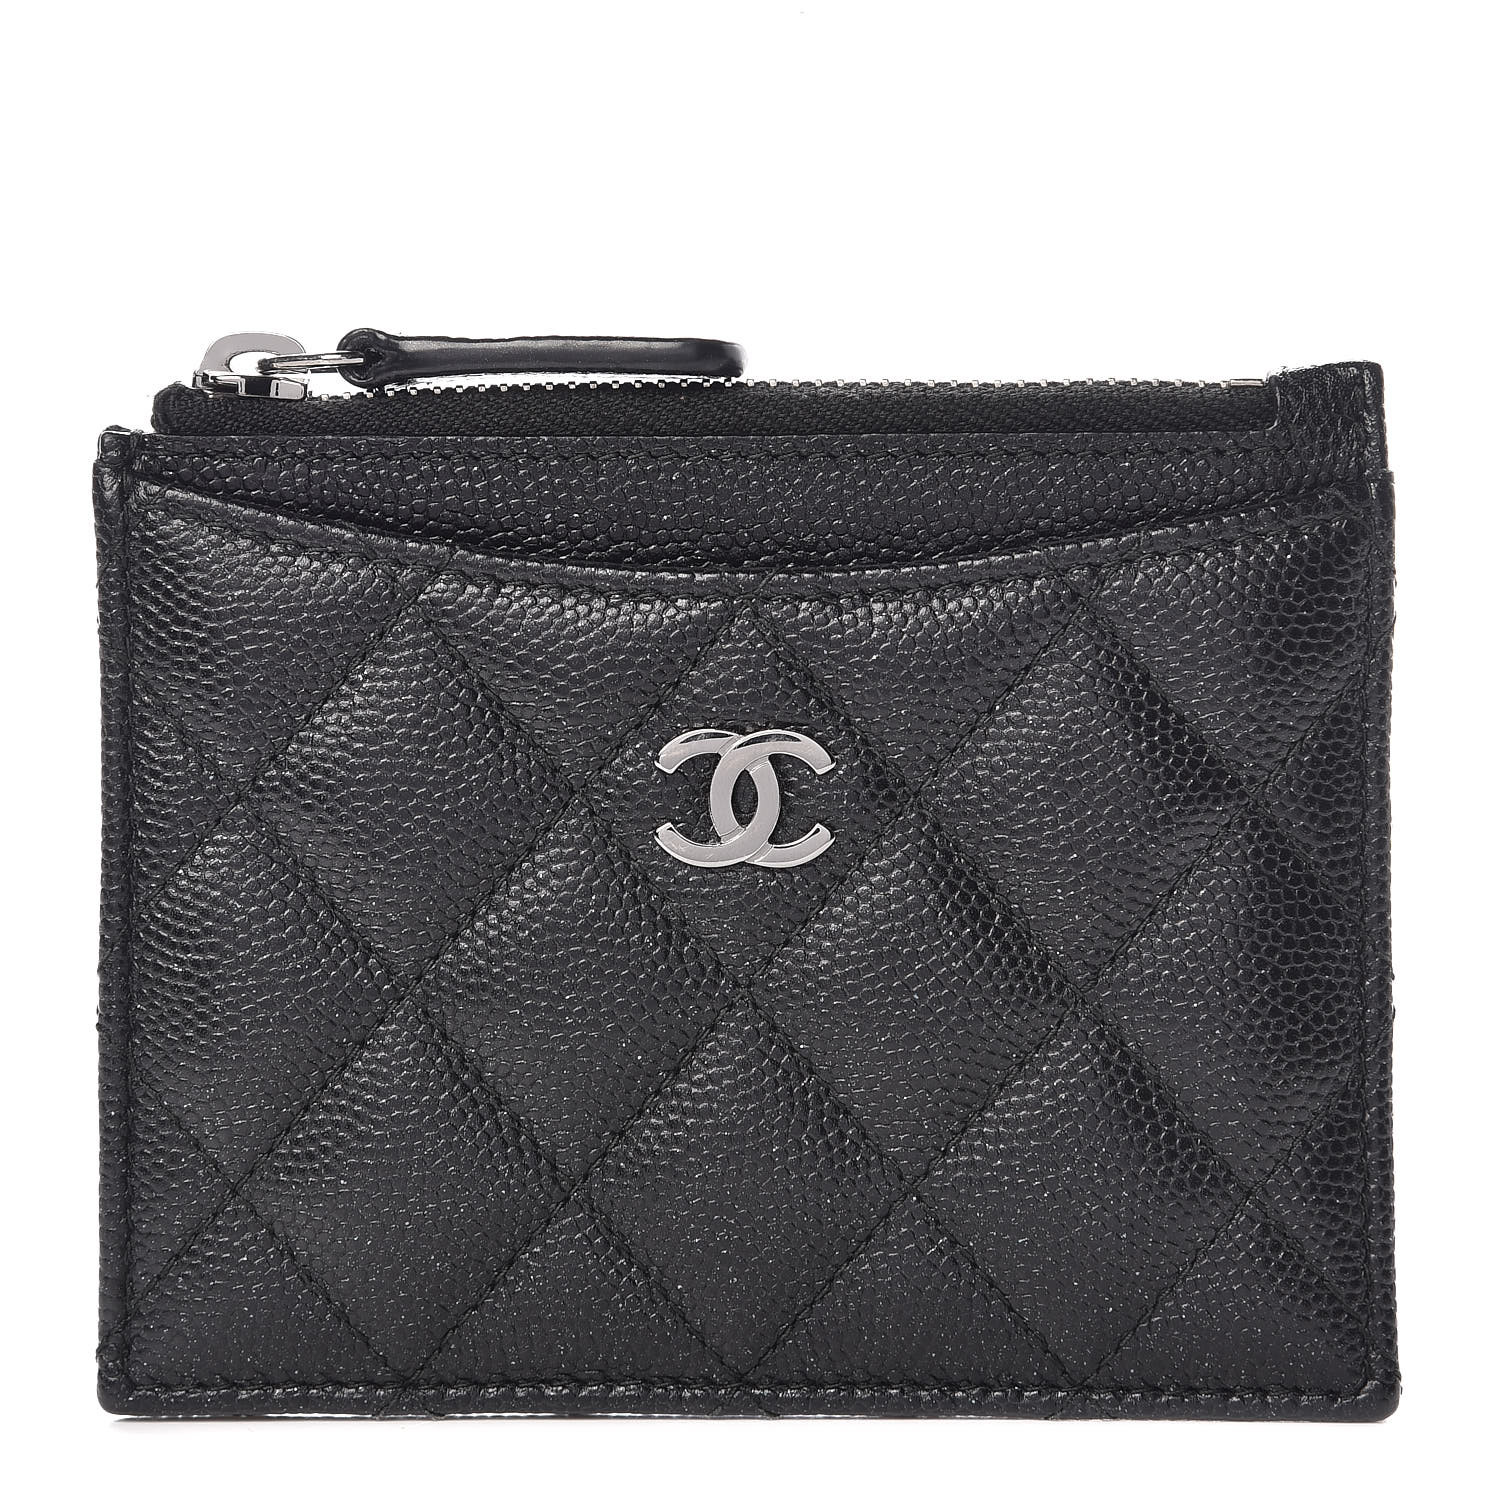 CHANEL Iridescent Caviar Quilted CC Zip Card Holder Black 361388